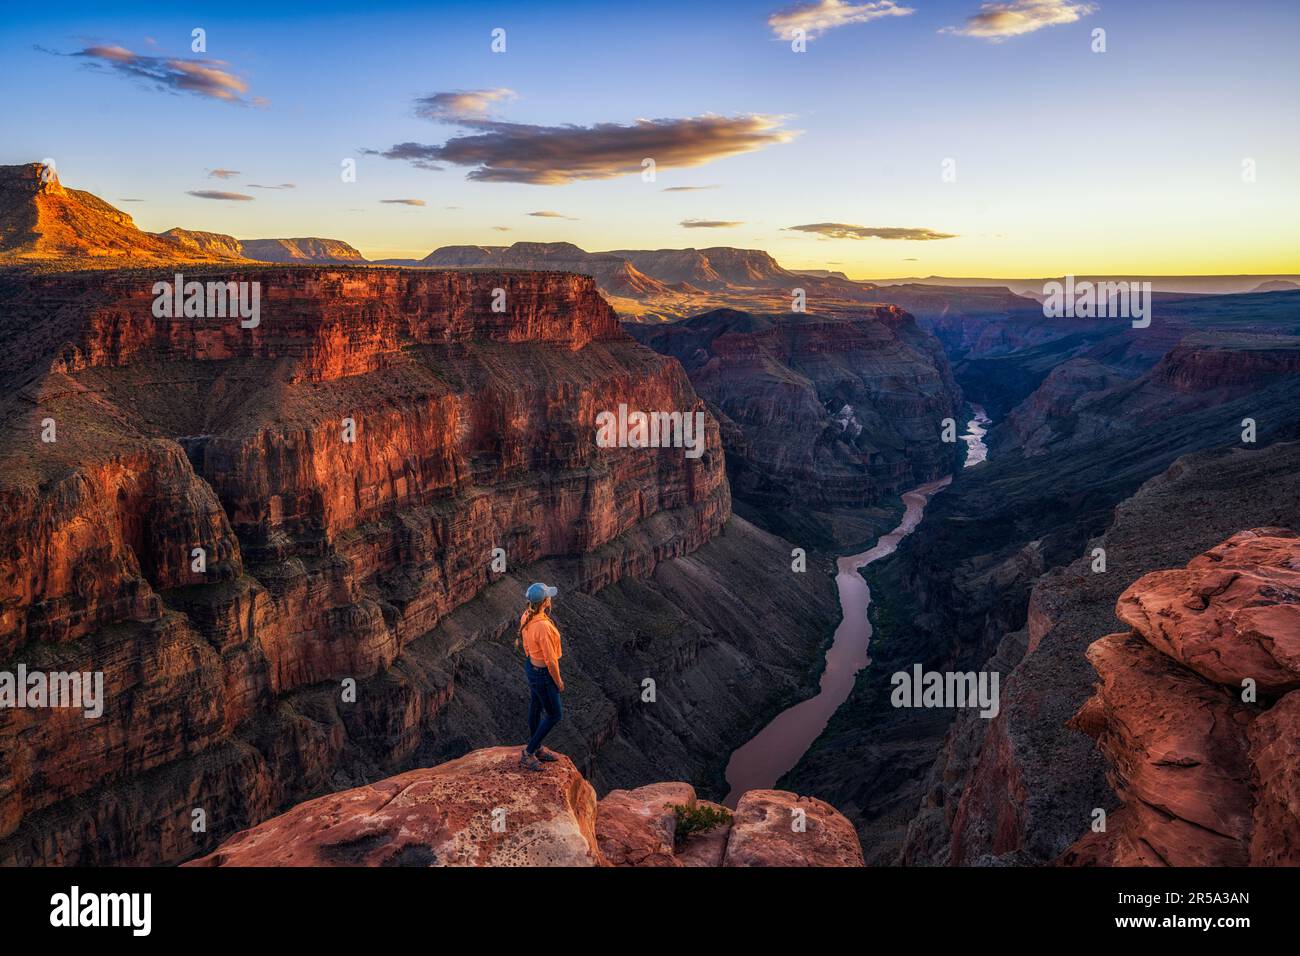 Woman Watching the Sunset Toroweap Overlook in the Grand Canyon Stock Photo